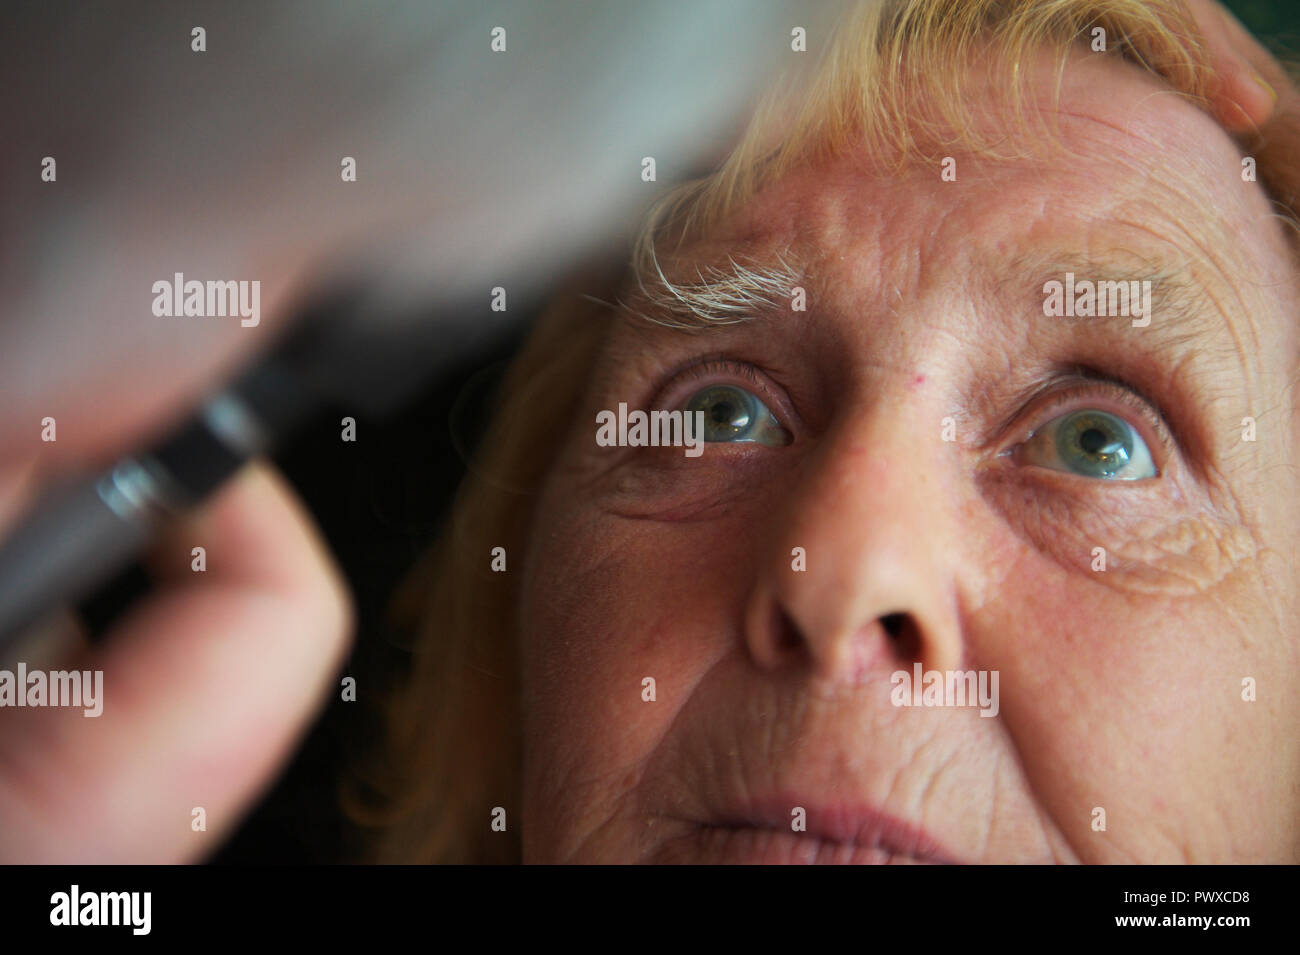 elderly female patient stares at doctors or GP eye examination light during appointment at GP surgery or community visit Stock Photo